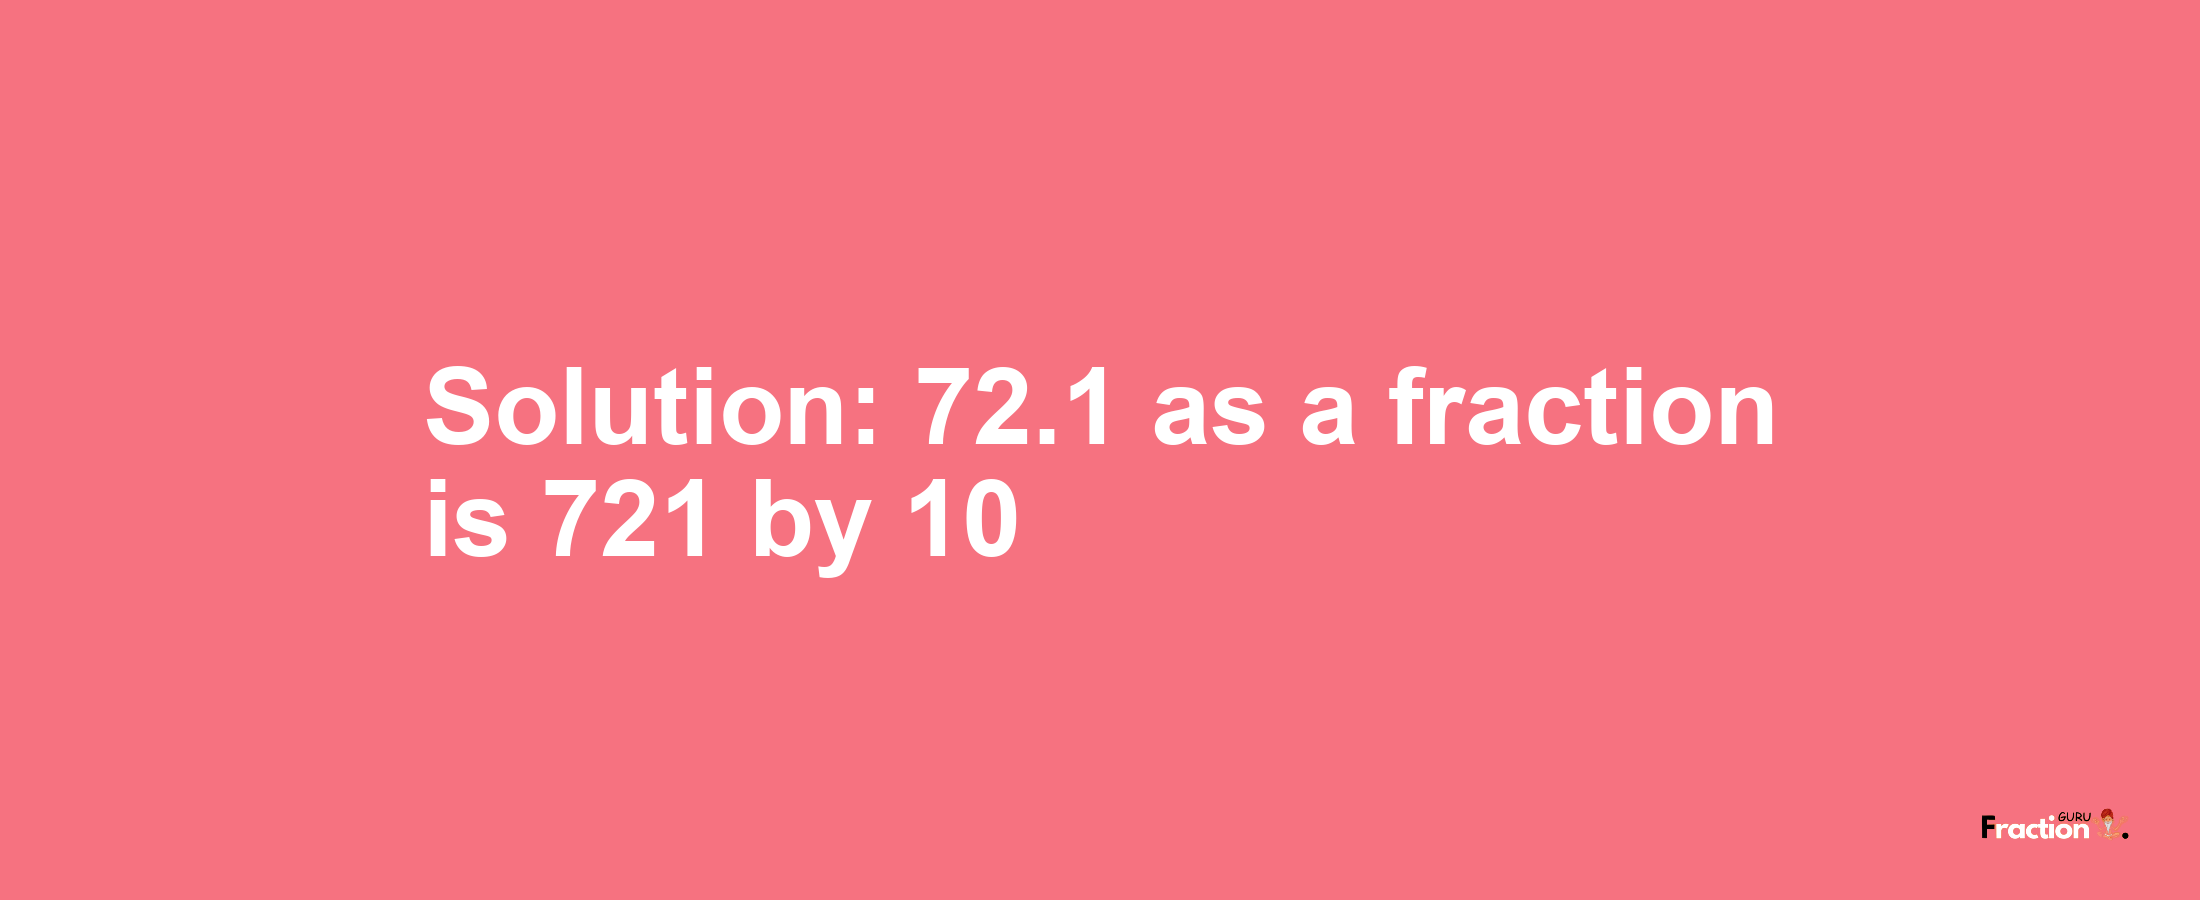 Solution:72.1 as a fraction is 721/10